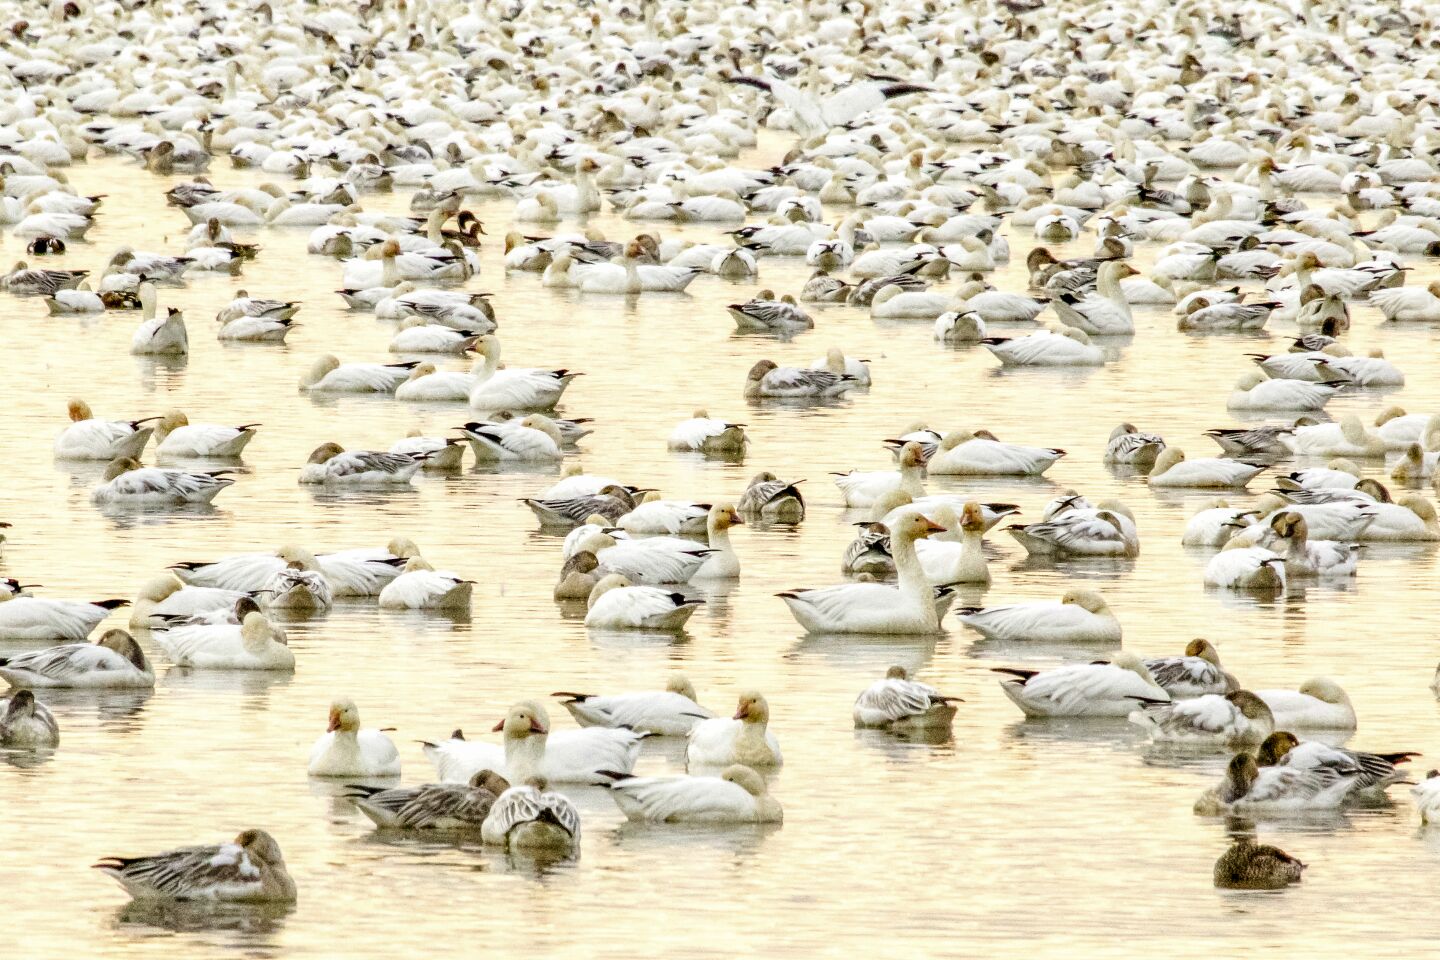 Thousands of snow geese and other species congregate to rest in the waters of the Sacramento National Wildlife Refuge.